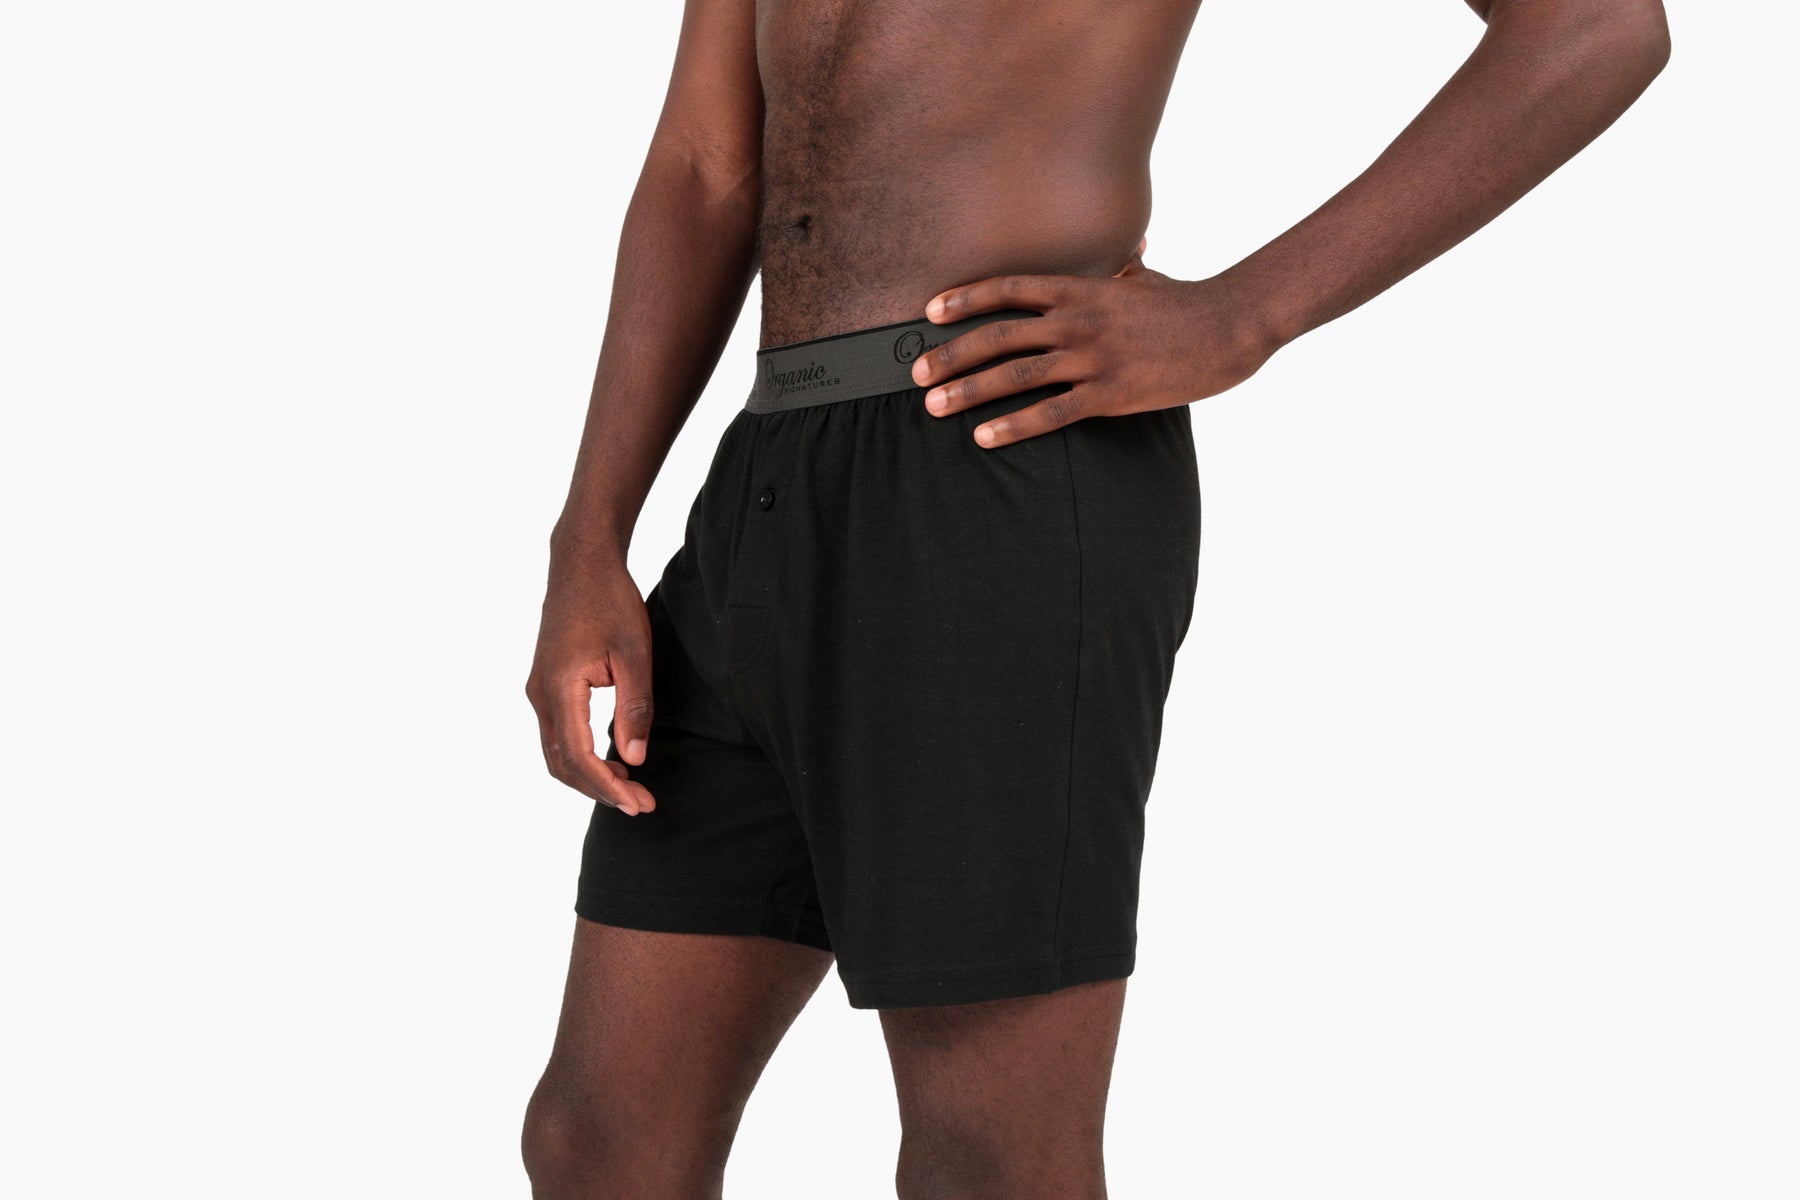 Eco-Friendly Bamboo Underwear, Sustainable Bamboo Men's Boxers